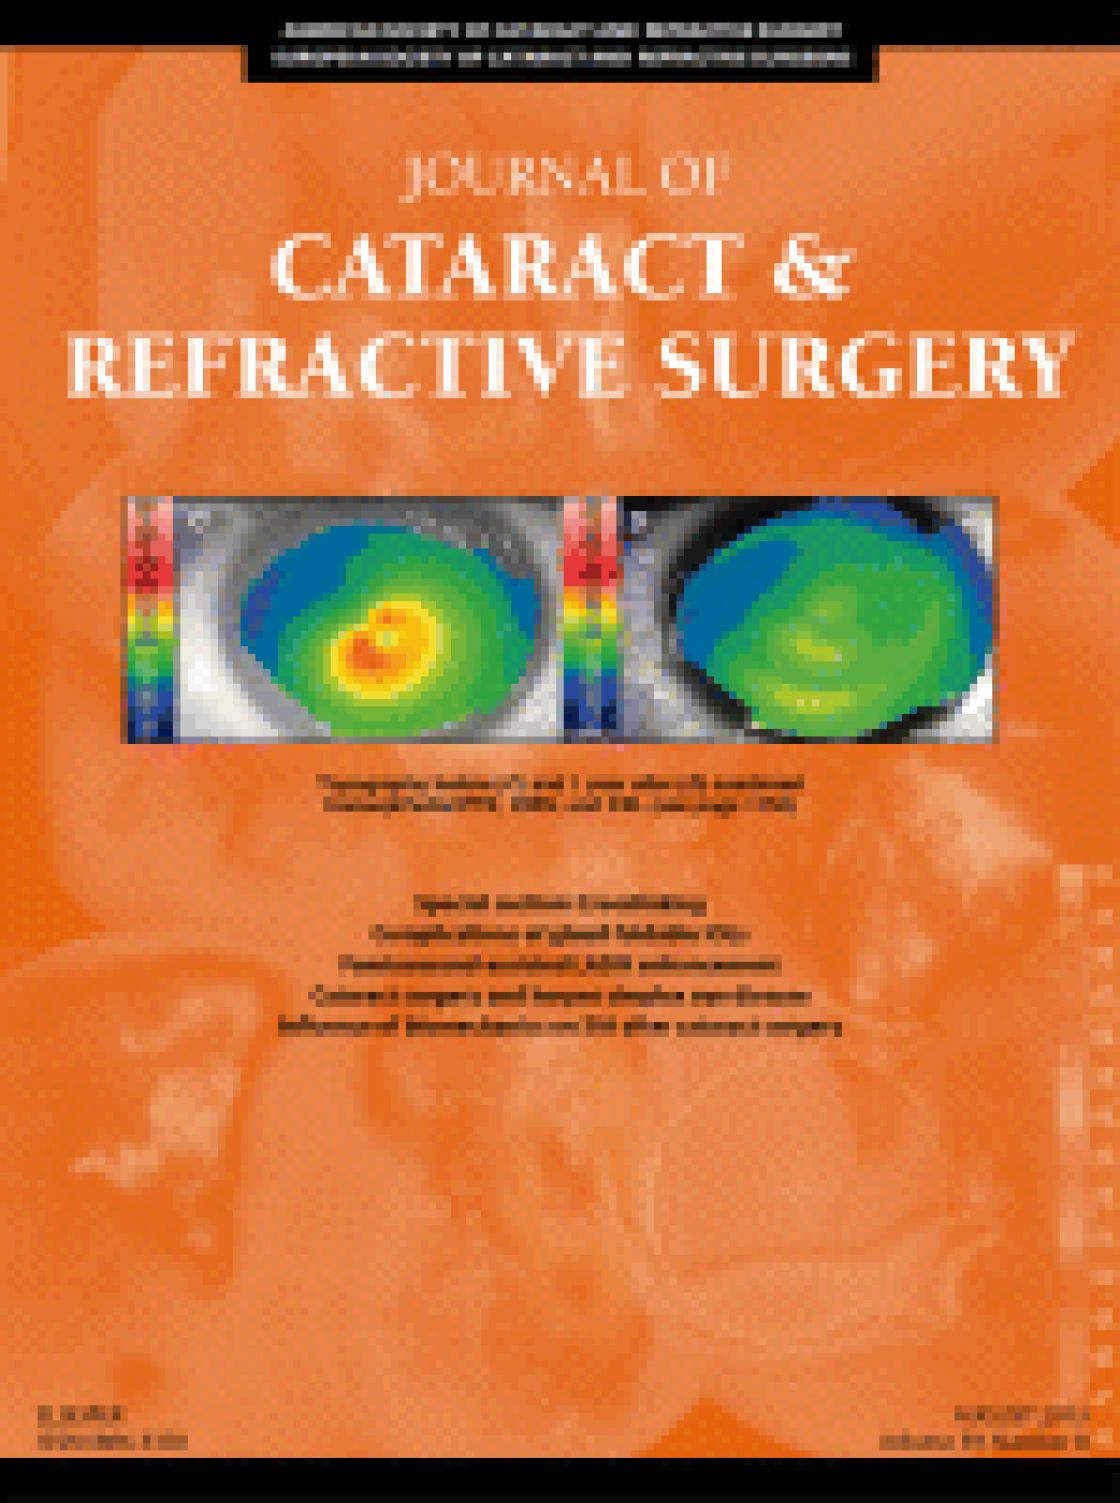 Intraocular lens power calculation with the Scheimpflug camera after refractive surgery